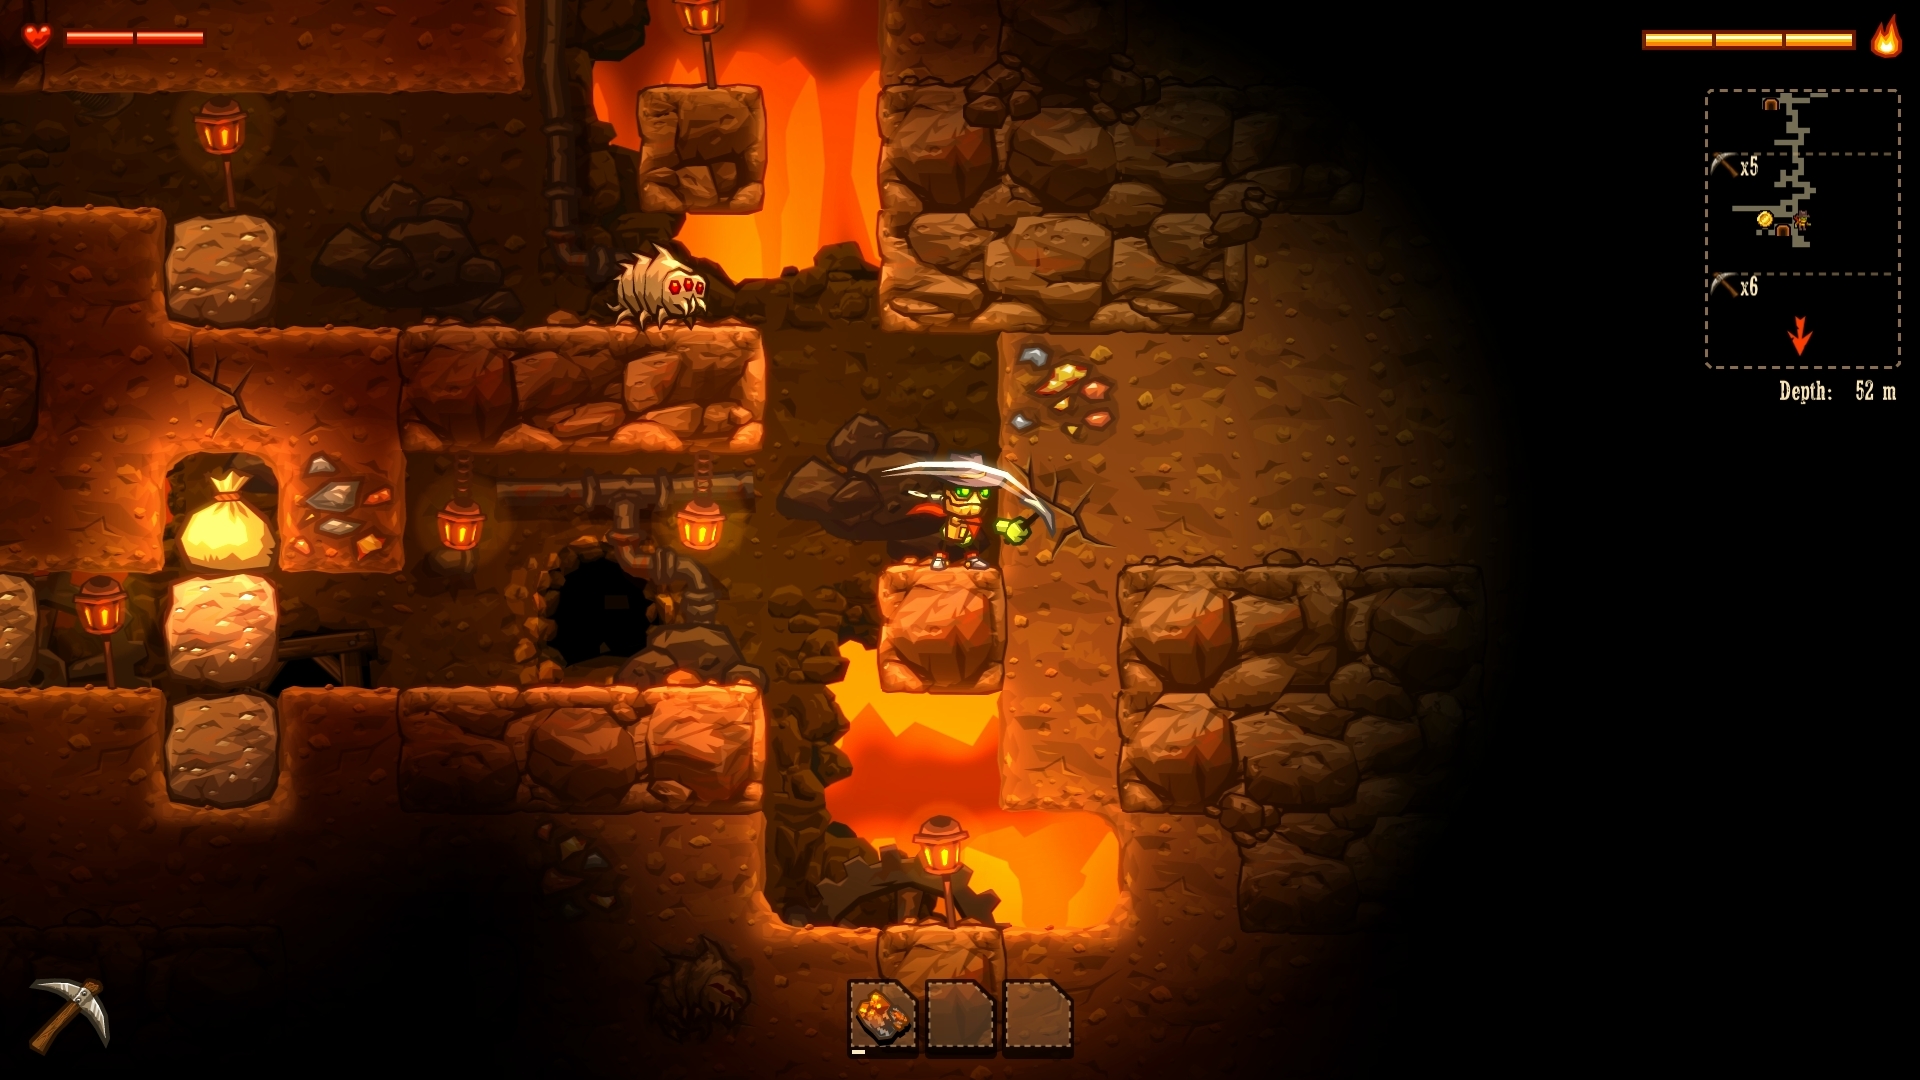 SteamWorld Dig coming to PS4 and PS Vita in March - Gematsu